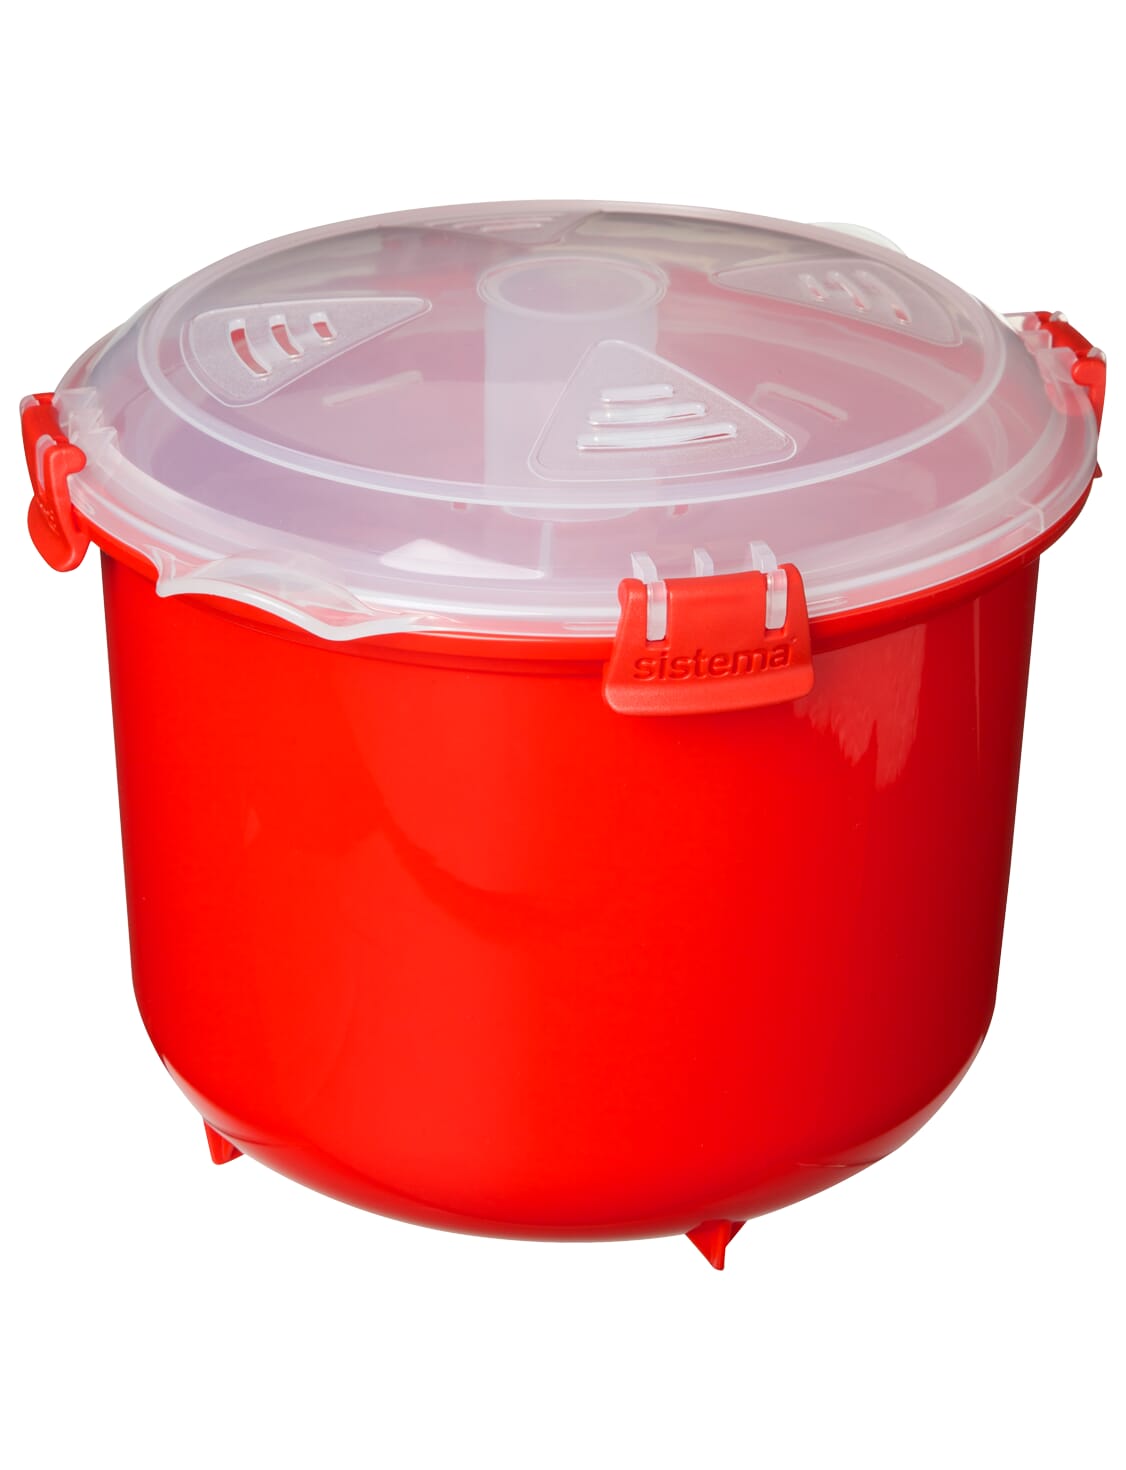 Red/Clear 2.6 L Sistema Microwave Rice Cooker 